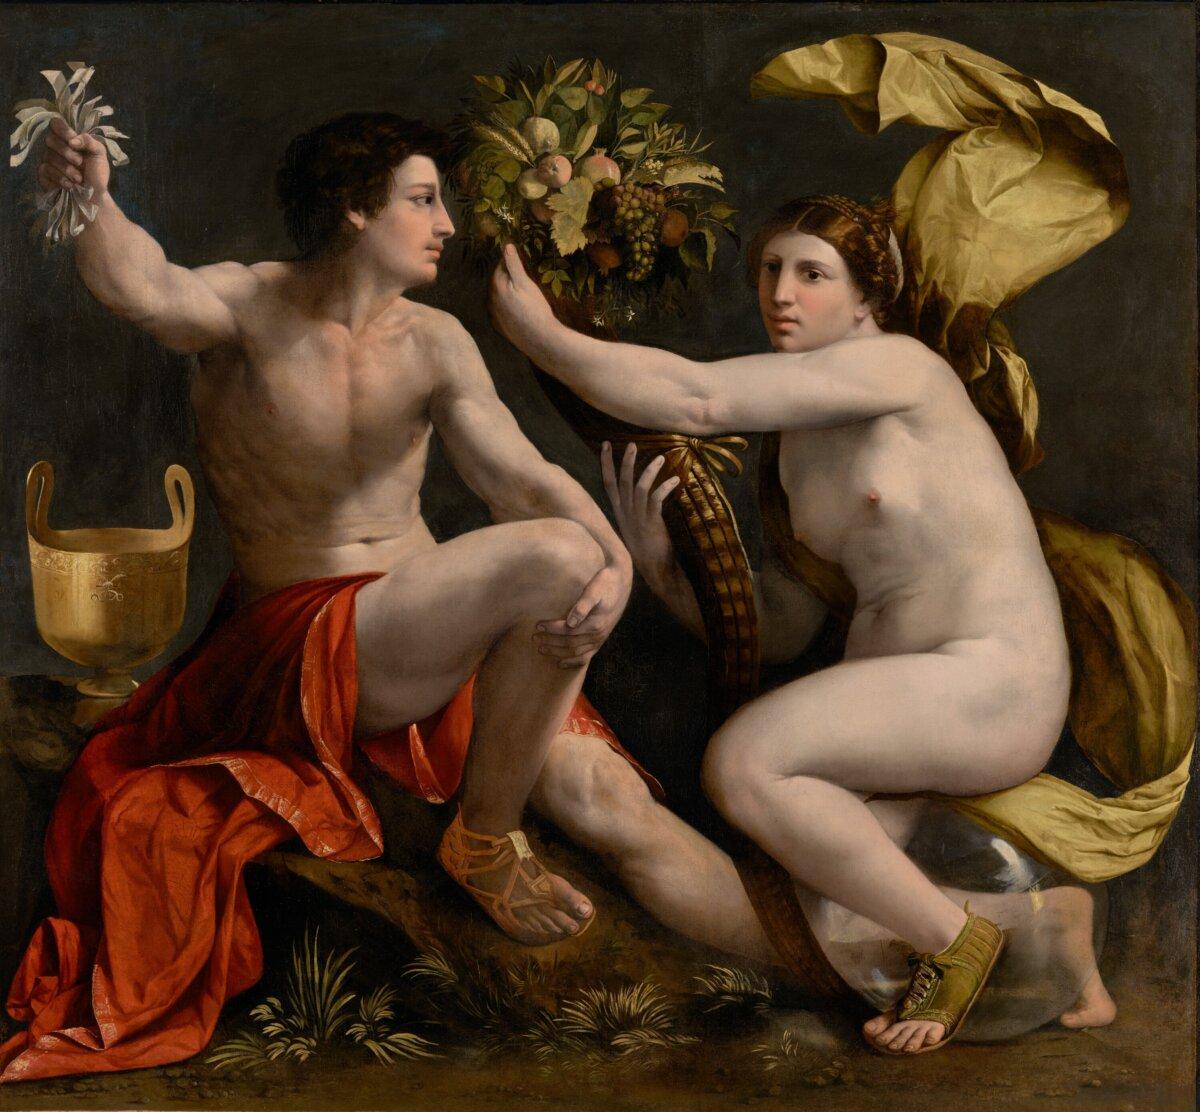 “Allegory of Fortune,” circa 1530, by Dosso Dossi. Oil on Canvas, 71 3/8 x 76 3/4 inches. Getty Center, Los Angeles. (Public Domain)